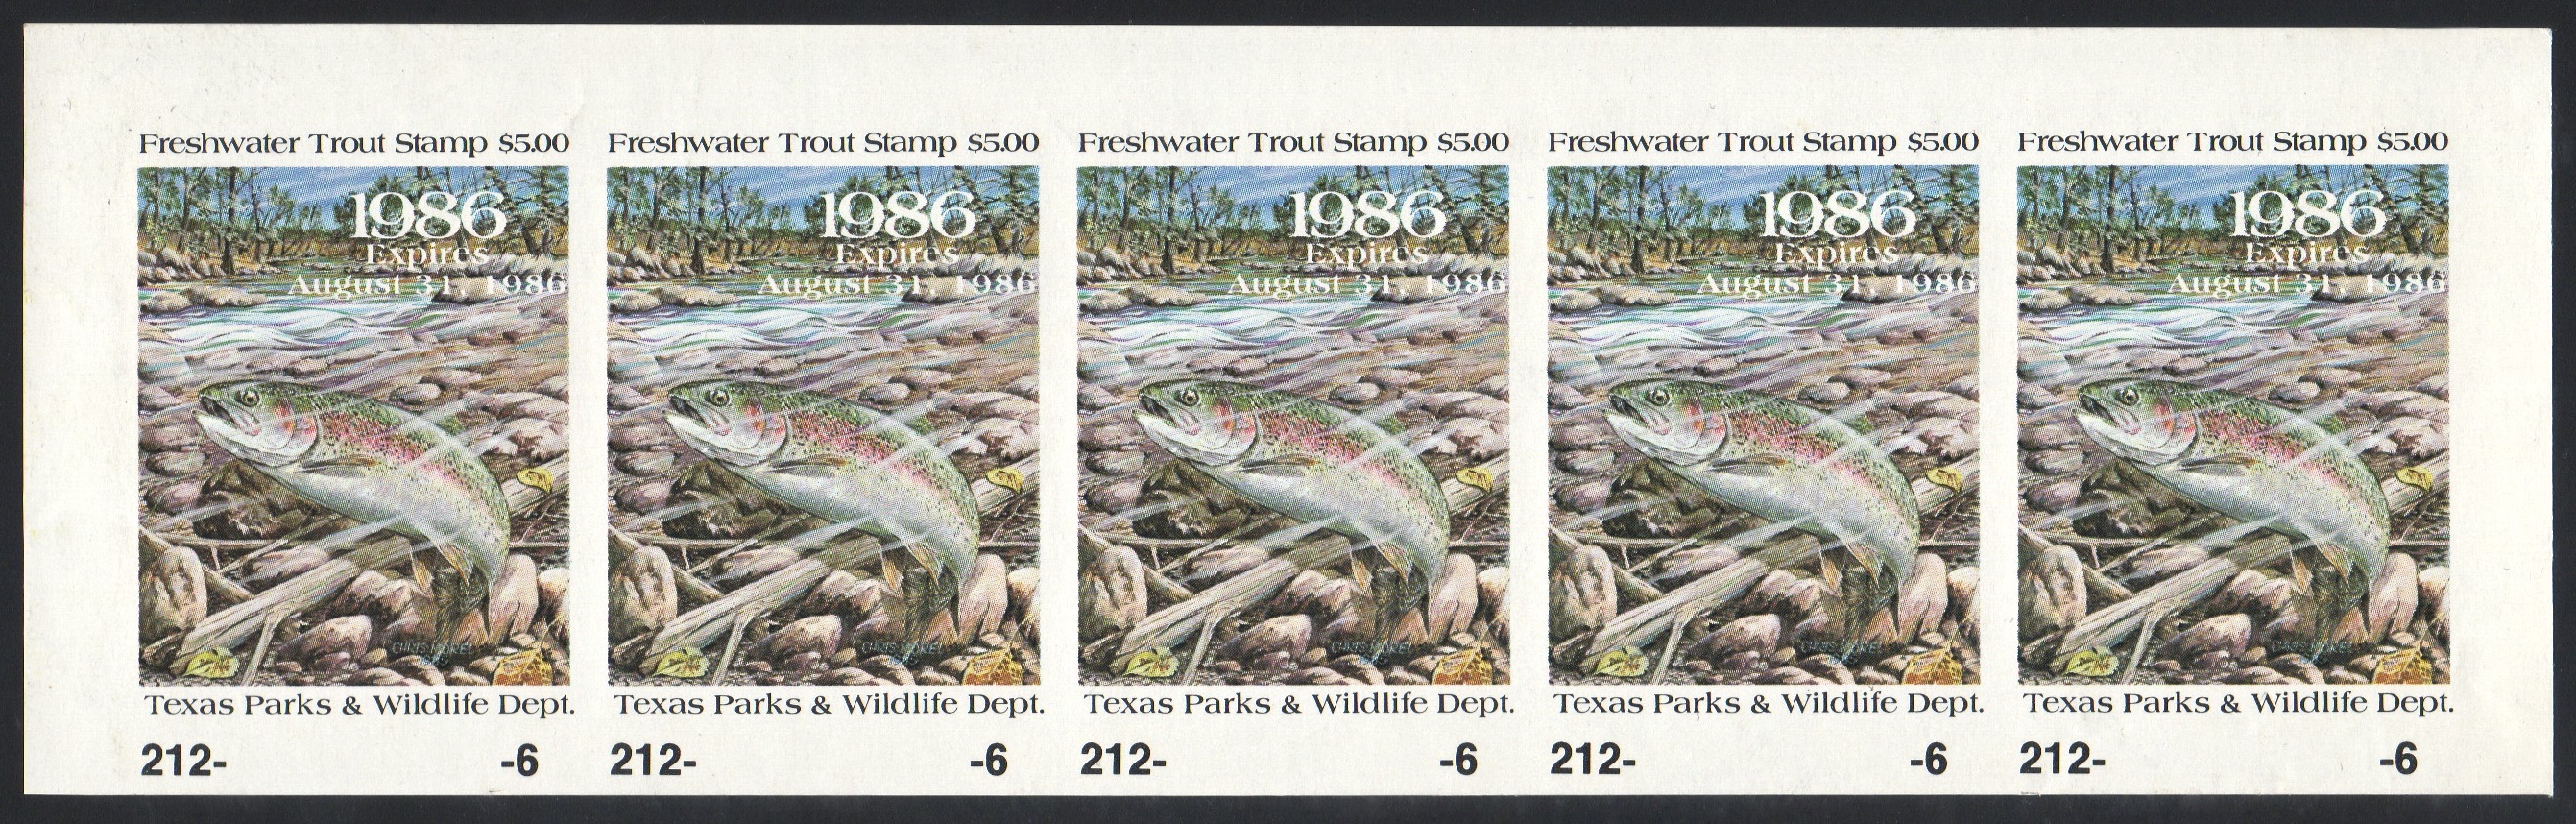 1985 Texas Trout Strip from the Original Texas Parks & Wildlife Department Proof Sheet (of 10)